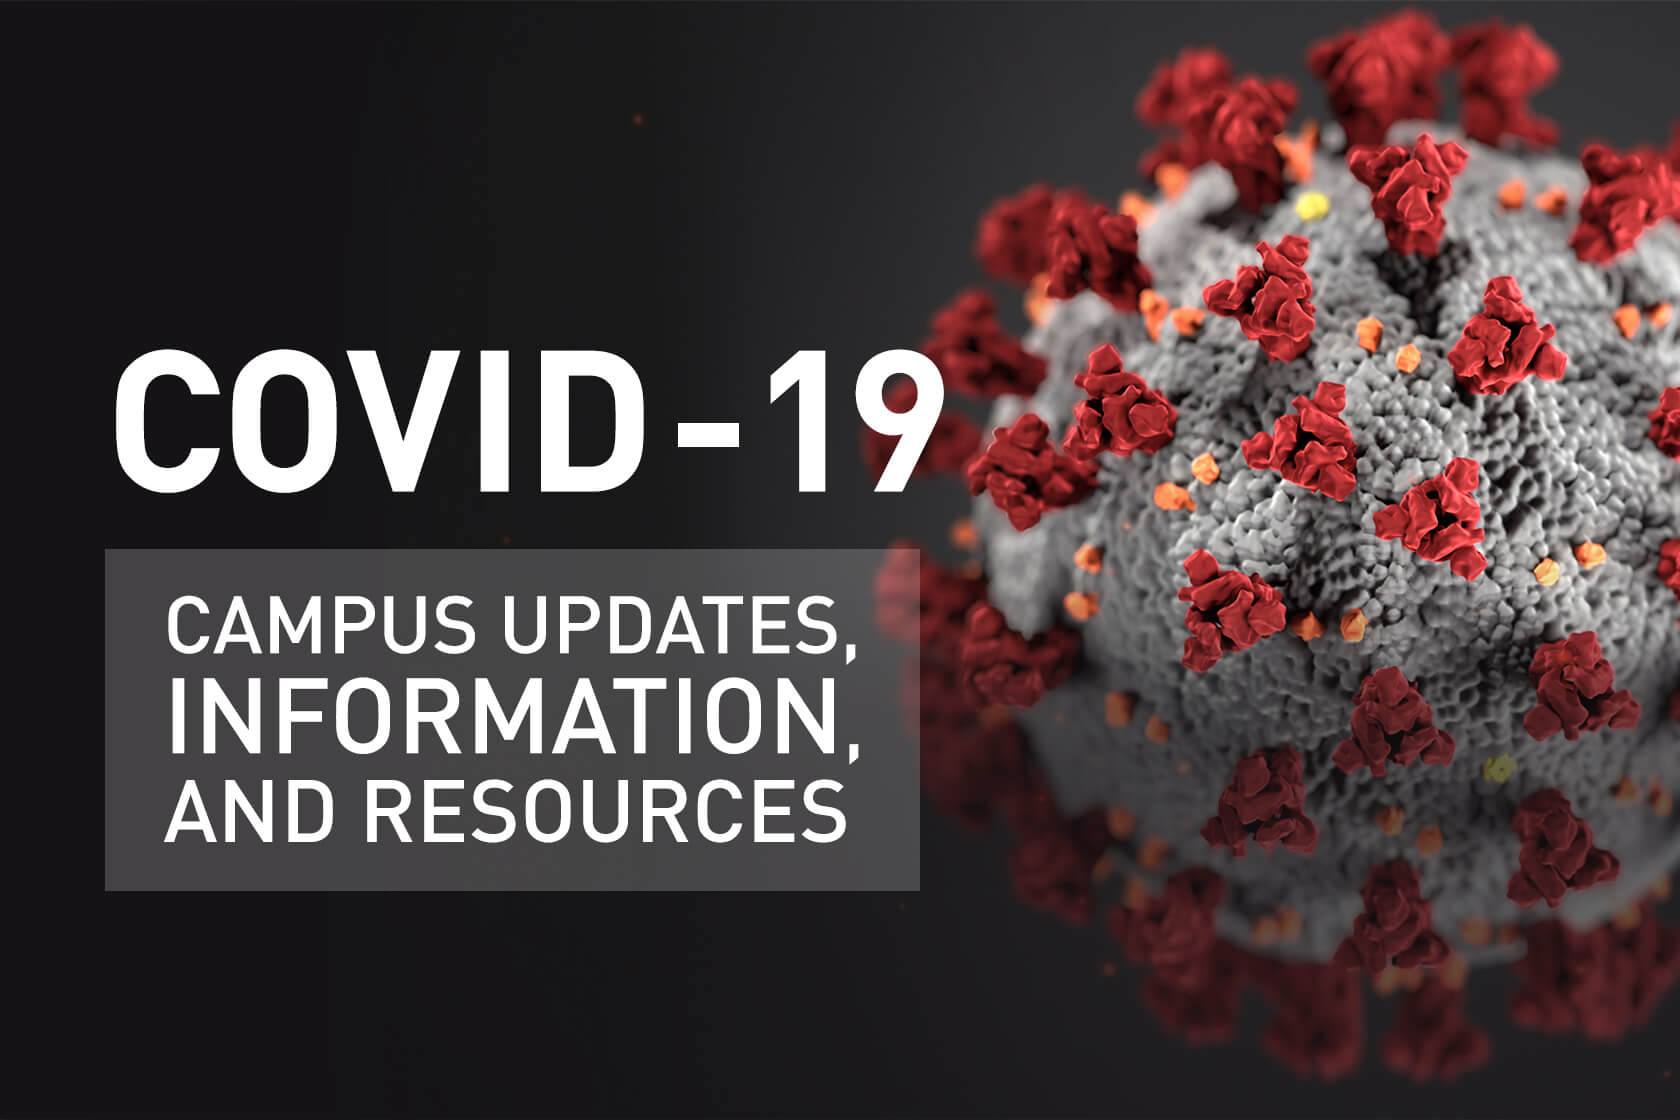 Campus updates, information, and resources for COVID-19